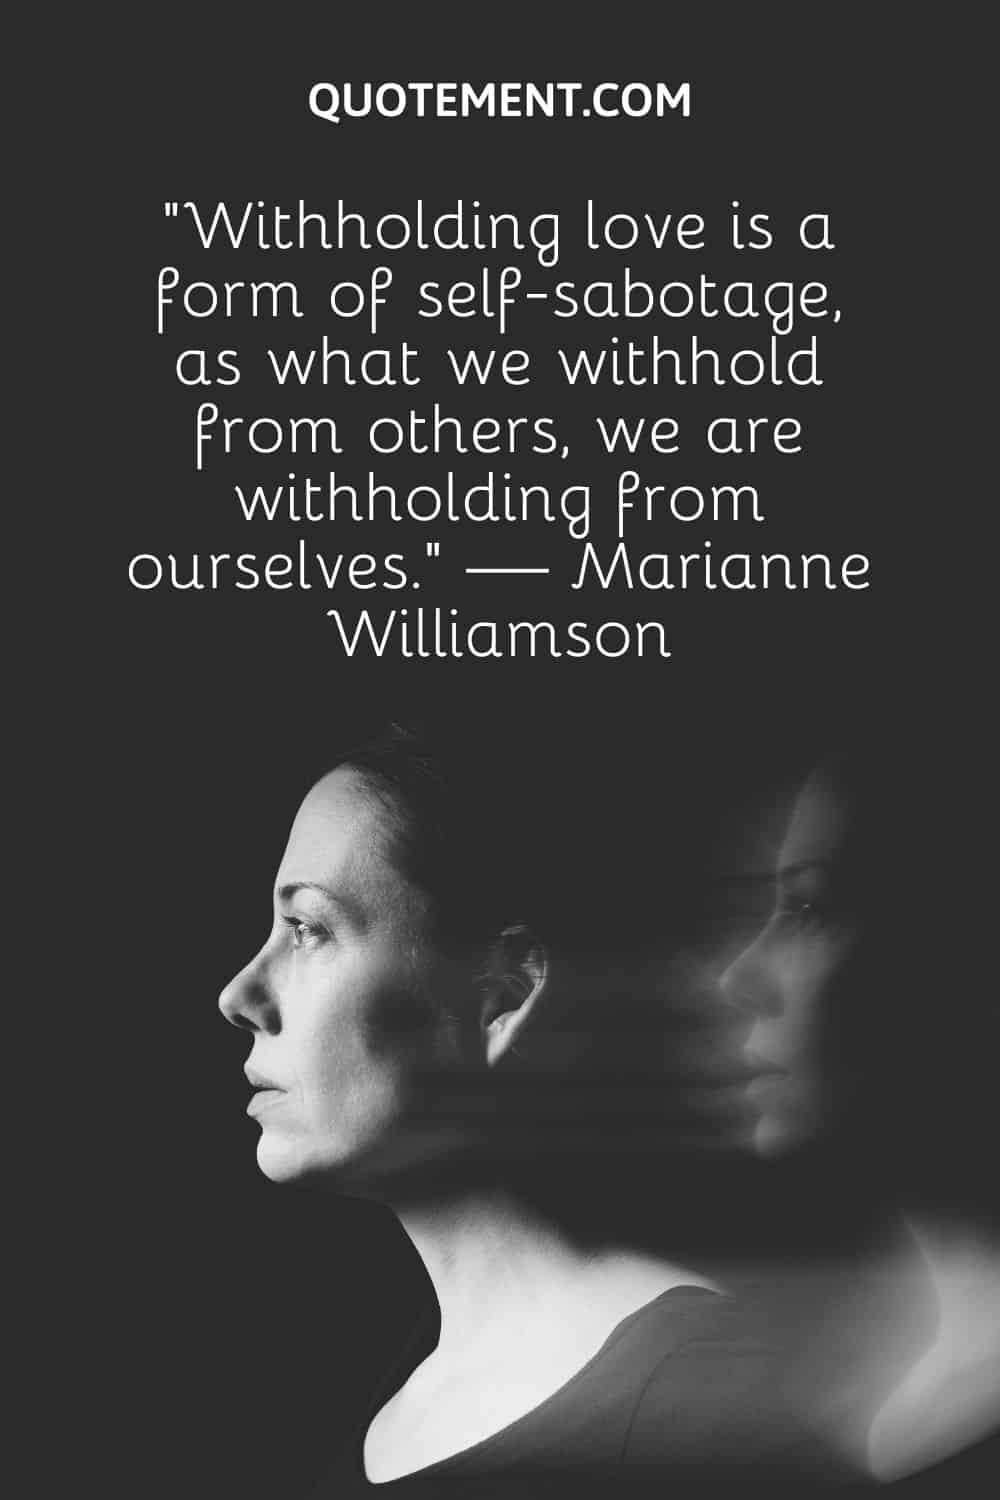 “Withholding love is a form of self-sabotage, as what we withhold from others, we are withholding from ourselves.” — Marianne Williamson